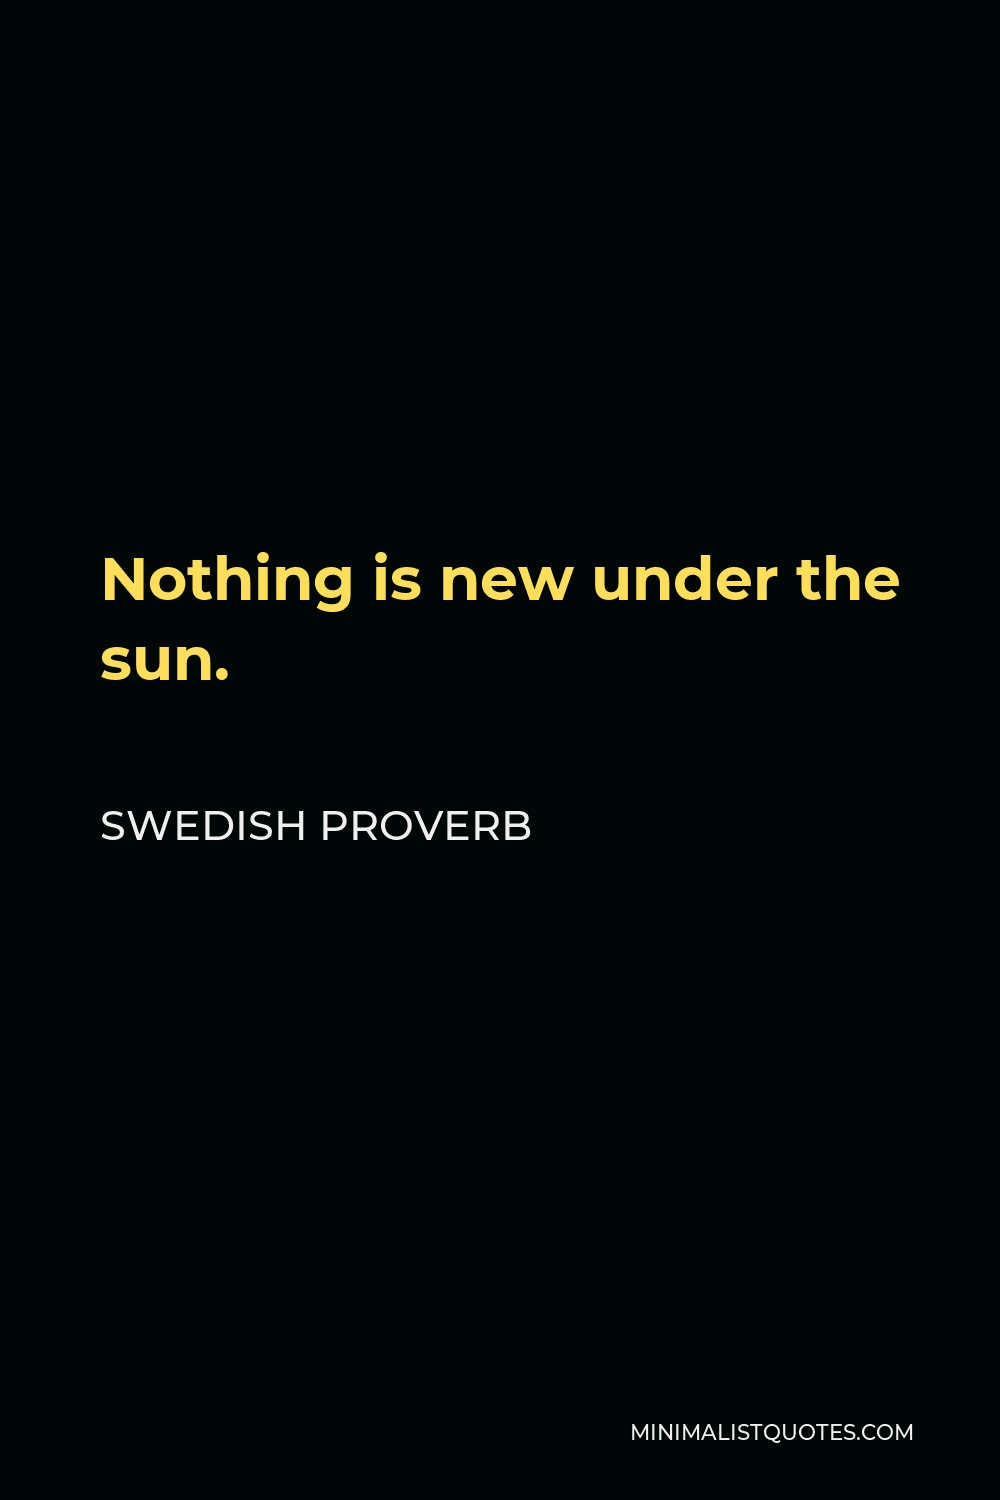 Swedish Proverb Quote - Nothing is new under the sun.